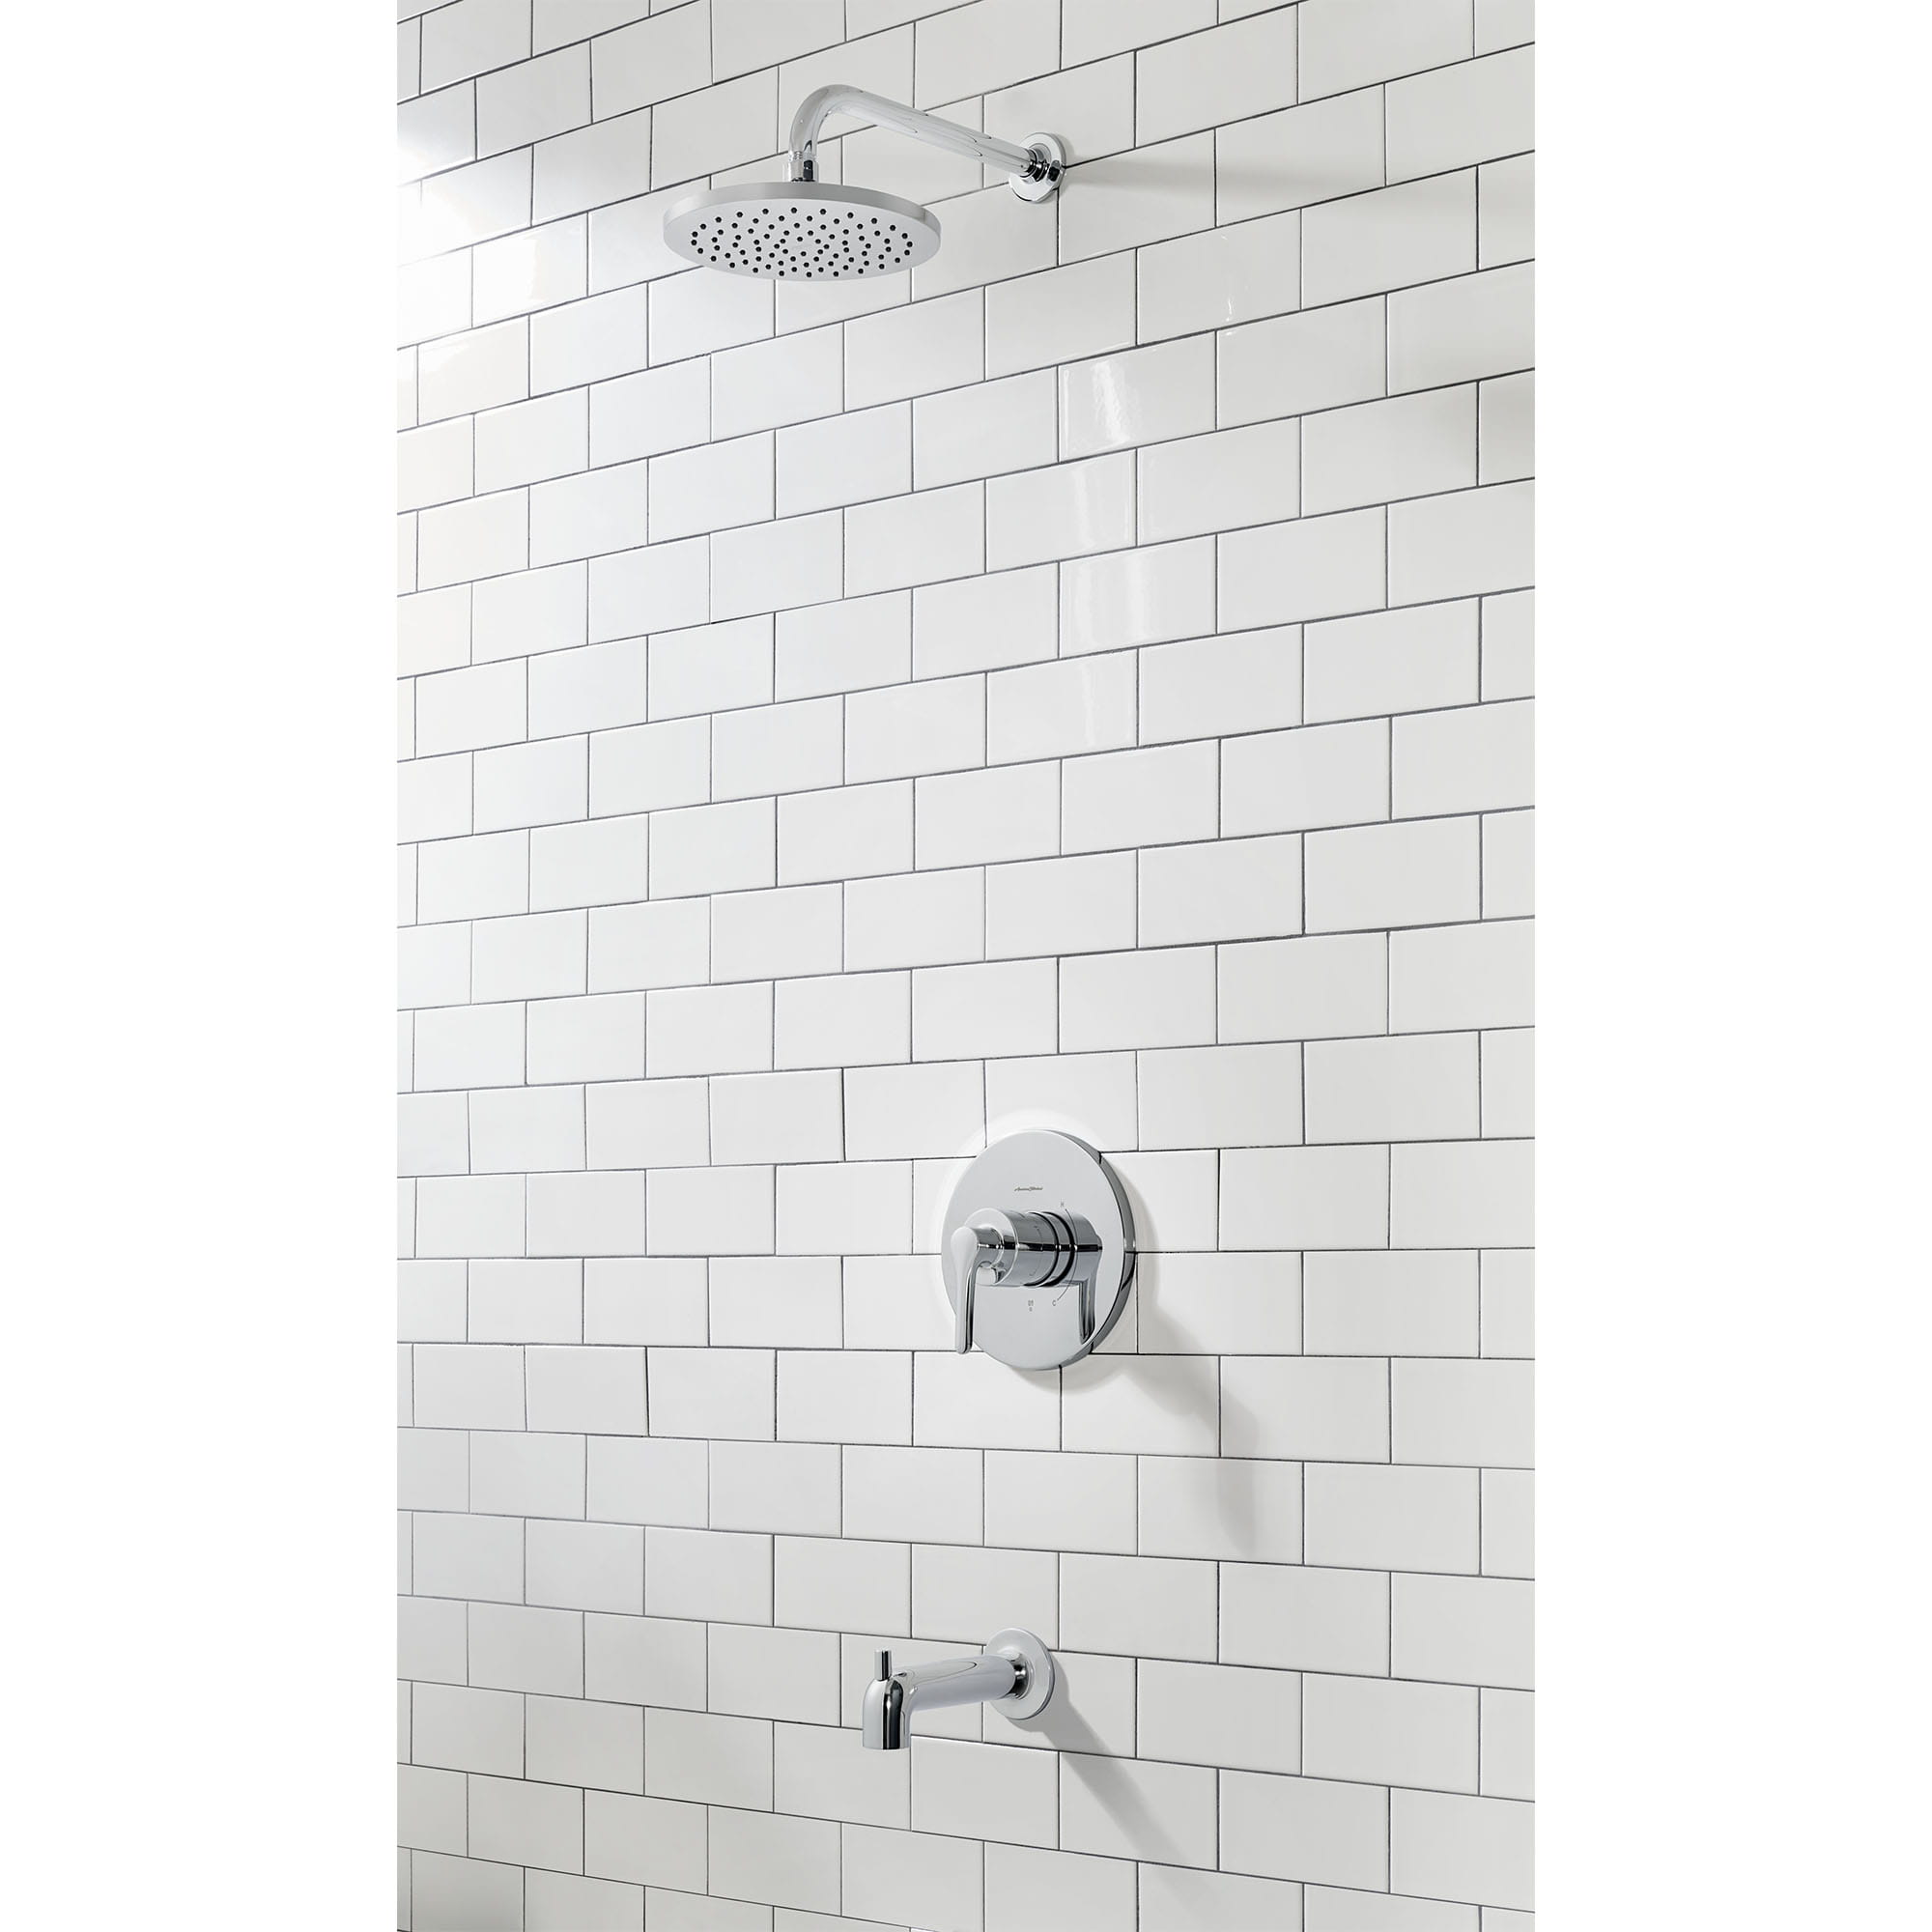 Studio® S 2.5 gpm/9.5 L/min Tub and Shower Trim Kit With Rain Showerhead, Double Ceramic Pressure Balance Cartridge With Lever Handle